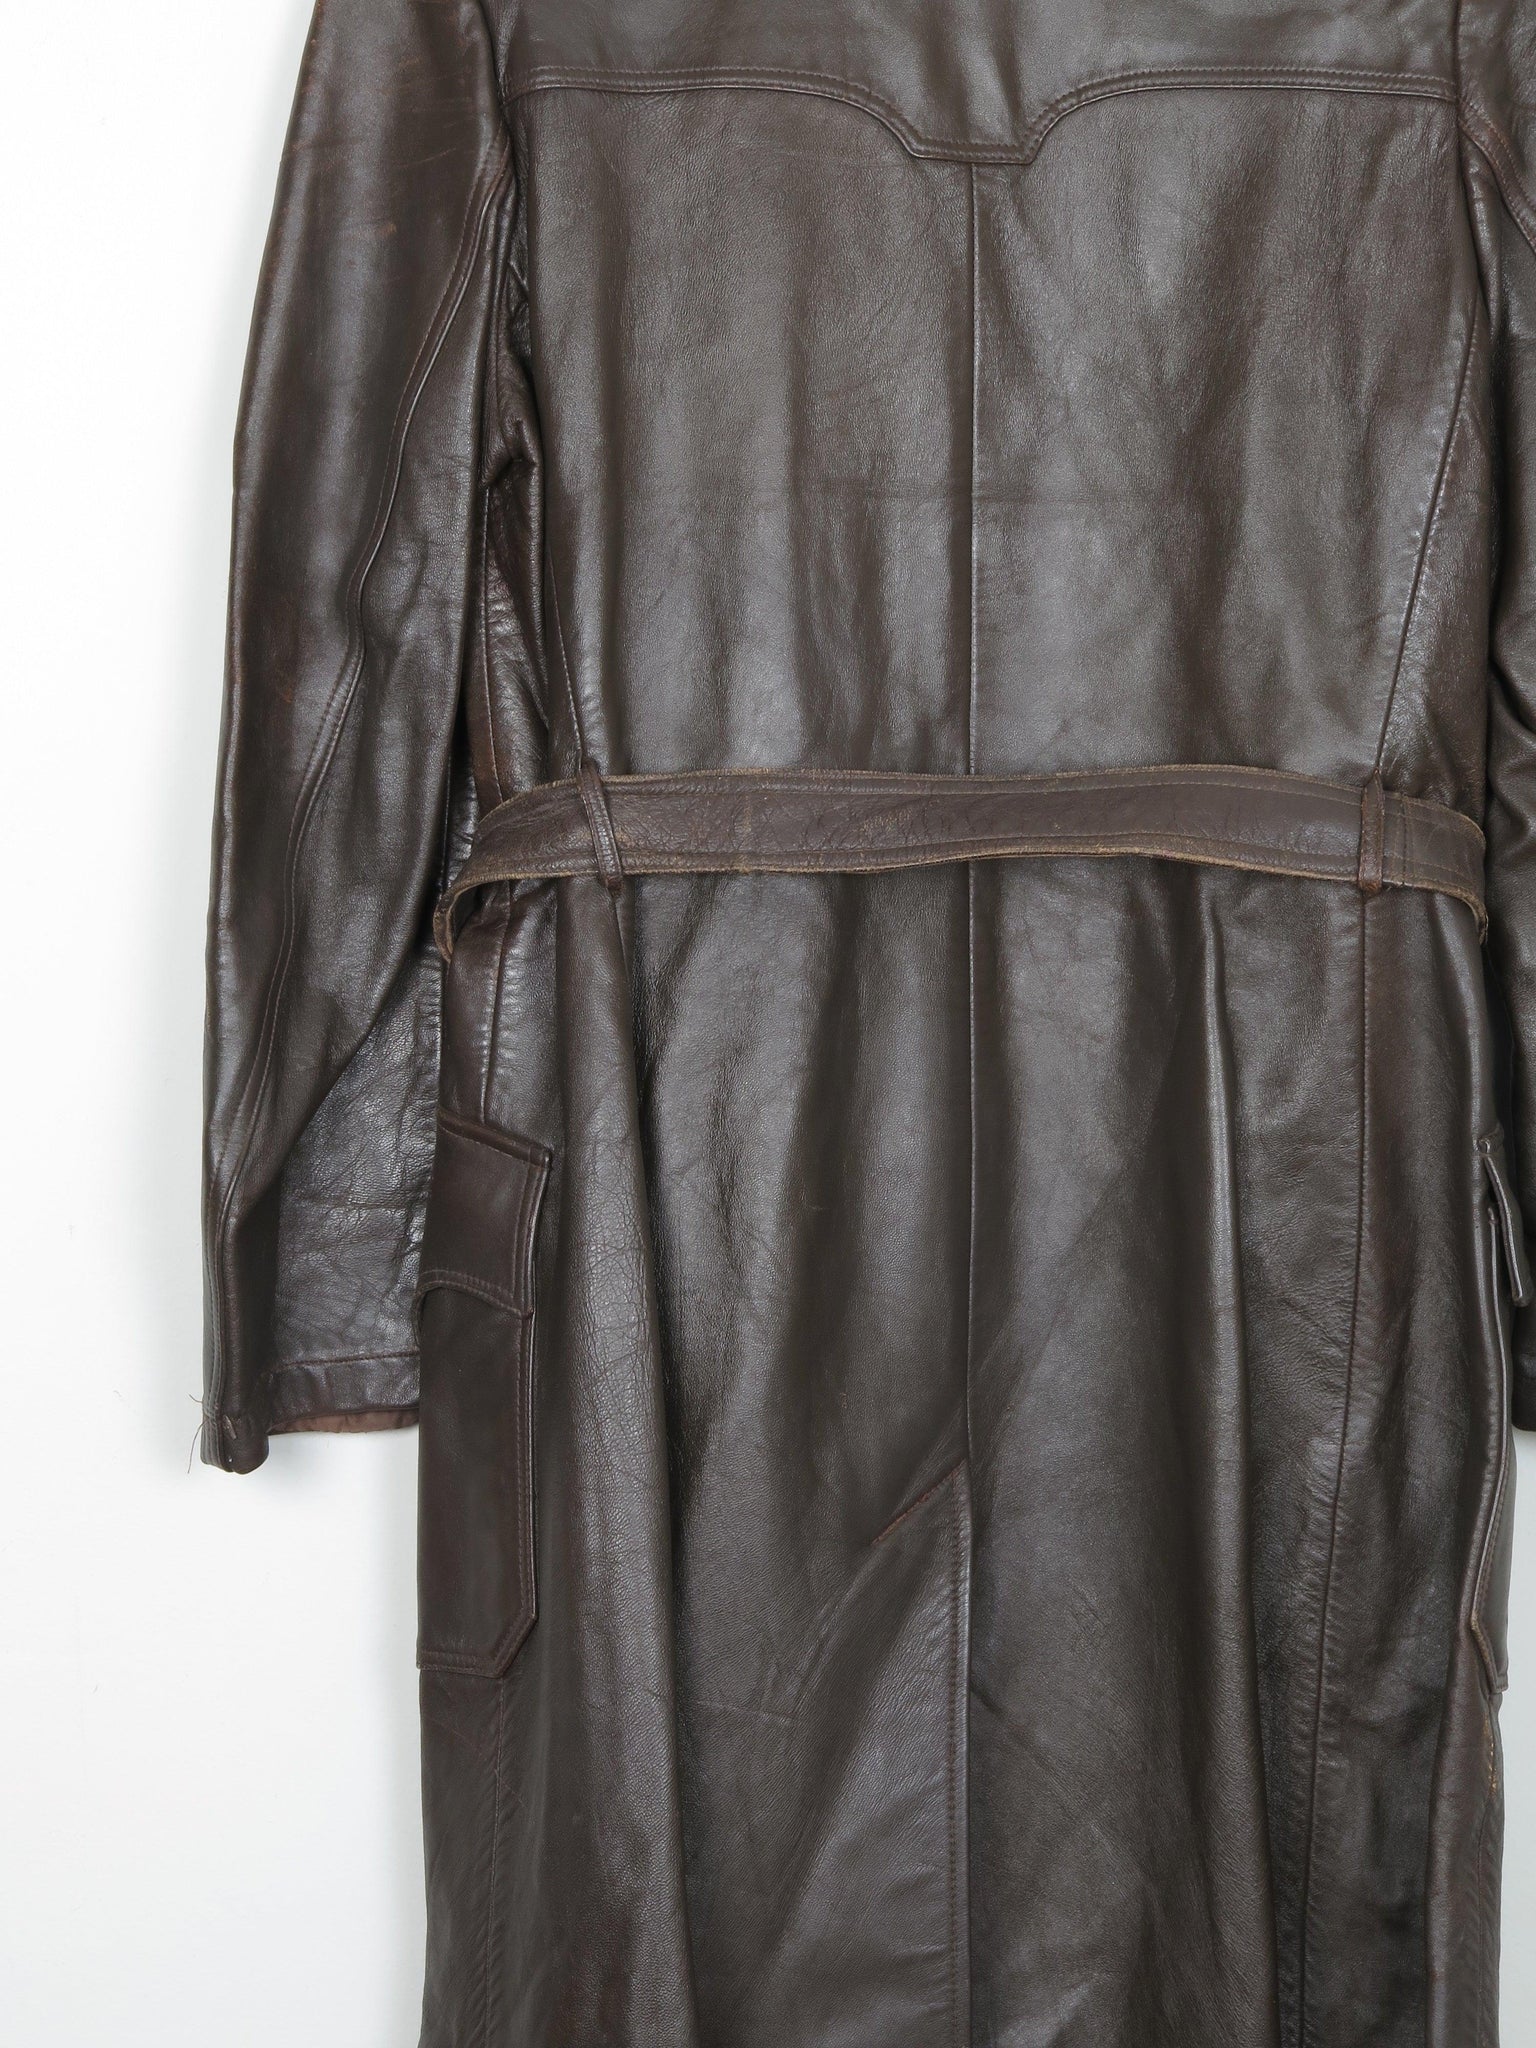 Women's Brown Long Leather Vintage Coat M - The Harlequin